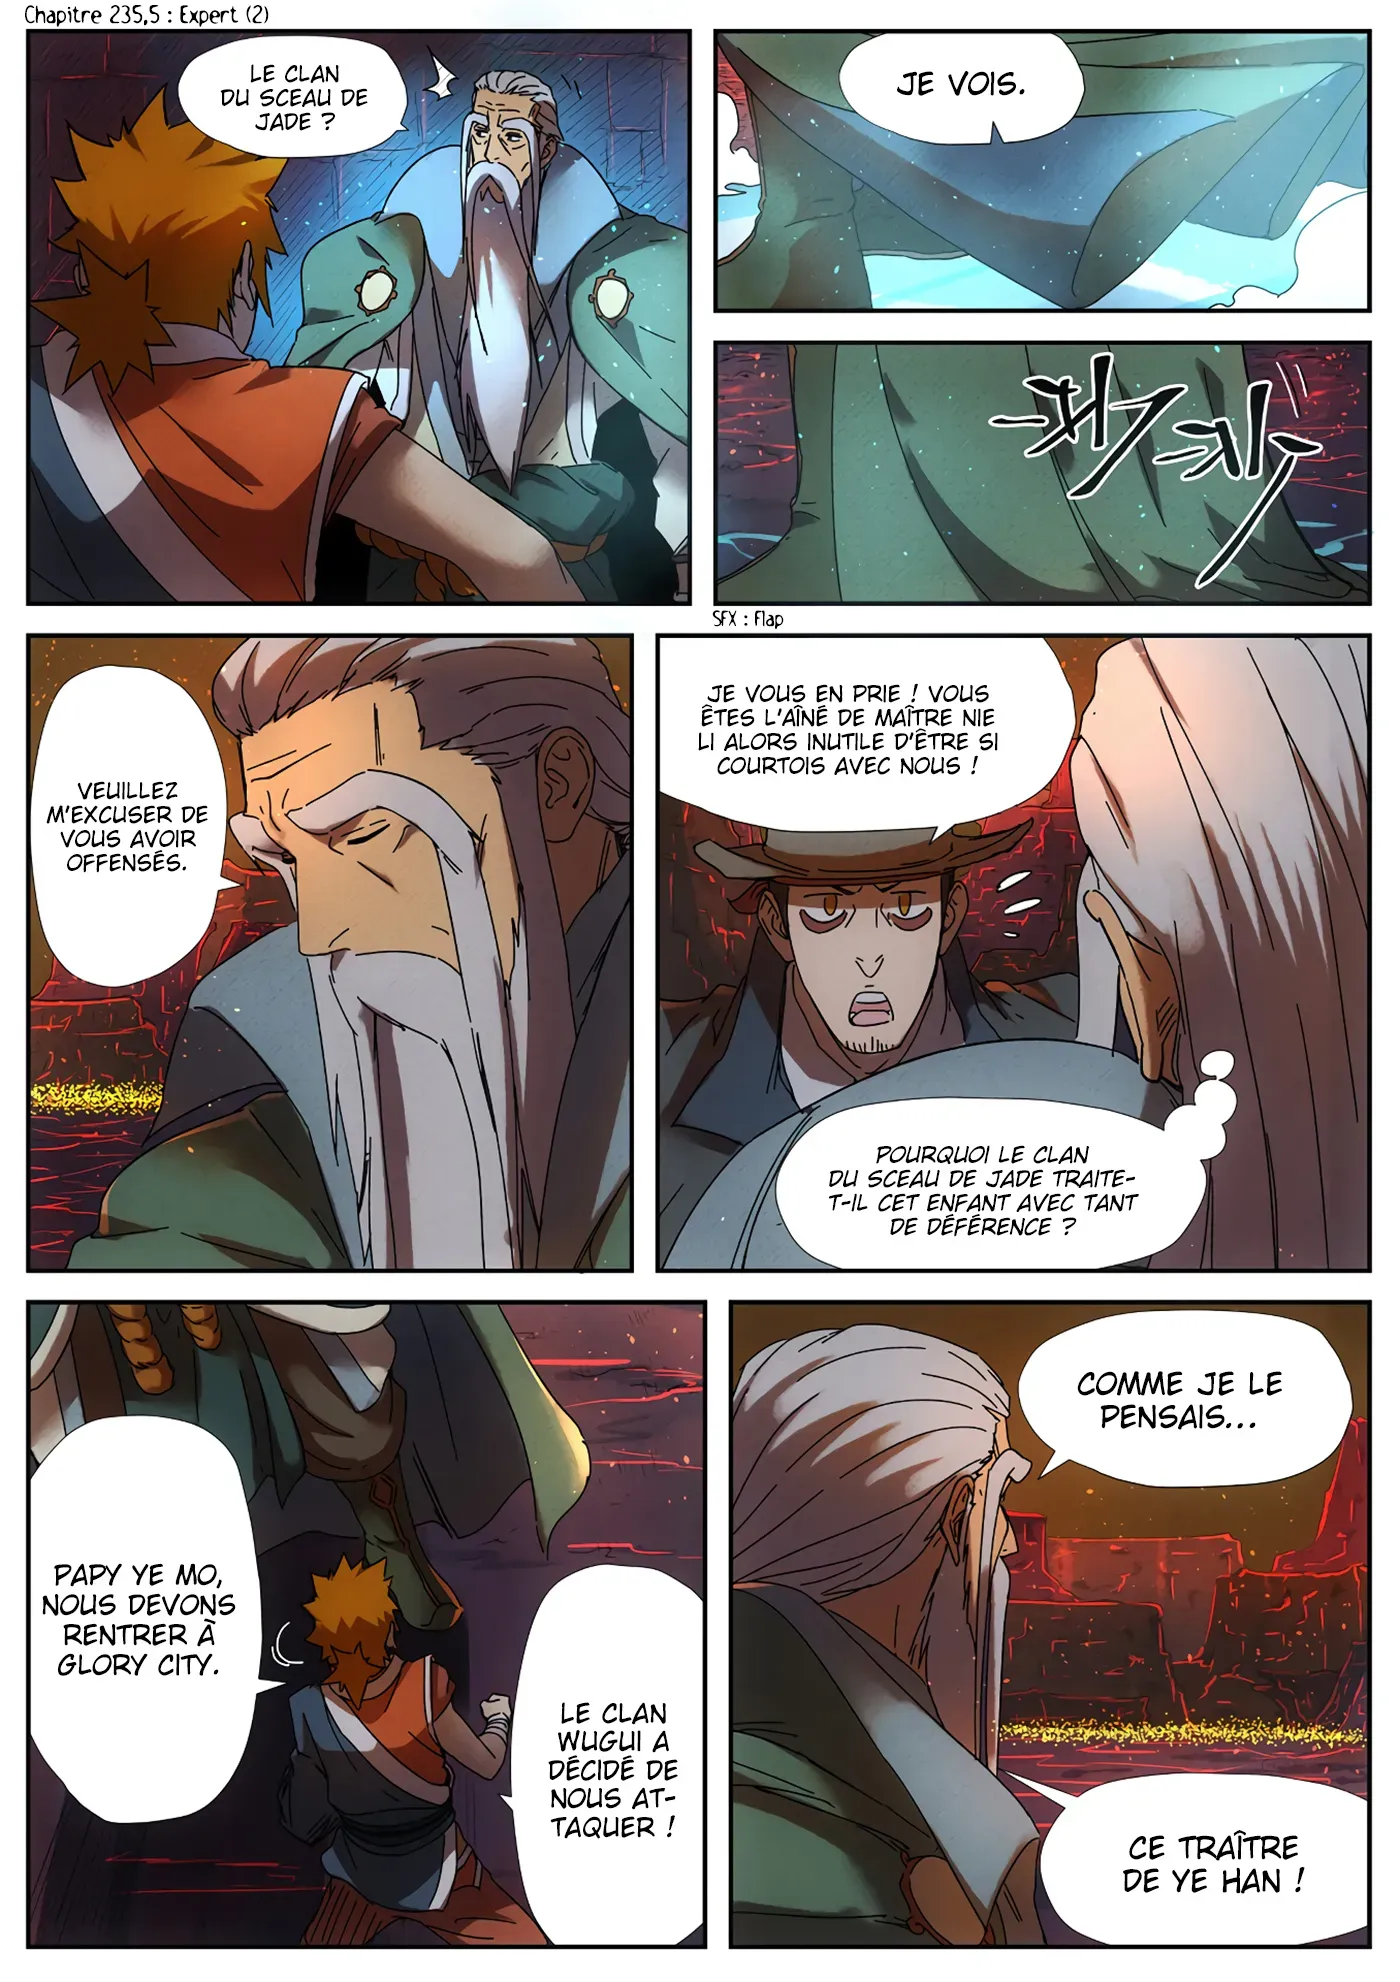 Tales Of Demons And Gods: Chapter chapitre-235.5 - Page 1